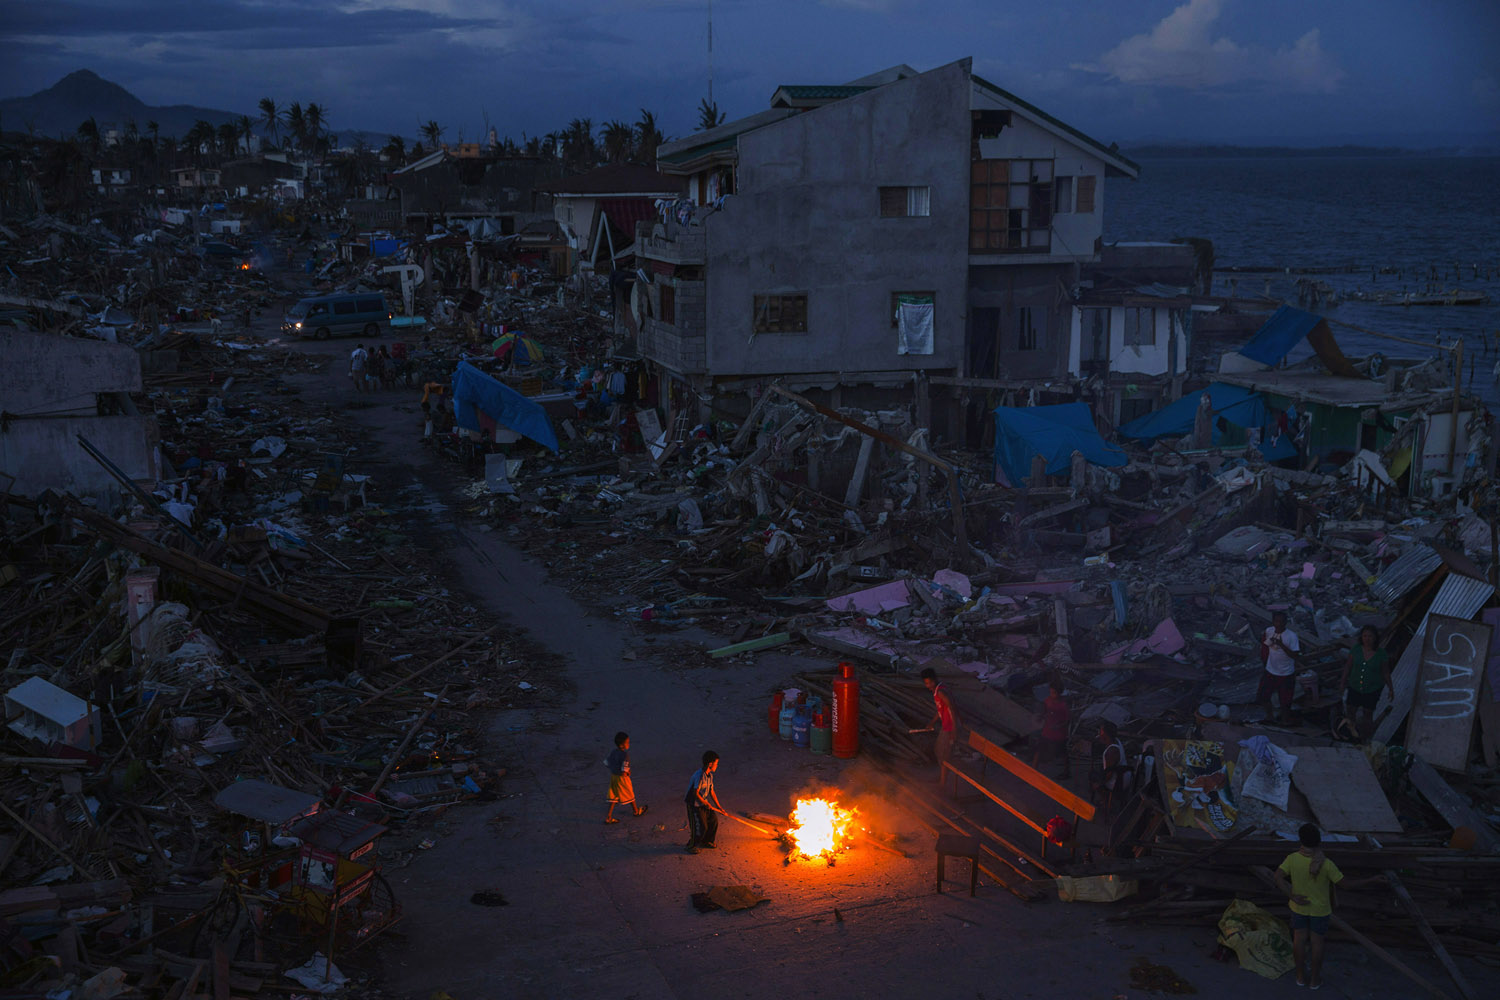 Nov. 16, 2013. People play by a fire in a neighborhood destroyed by Typhoon Haiyan in Tacloban, the Philippines.